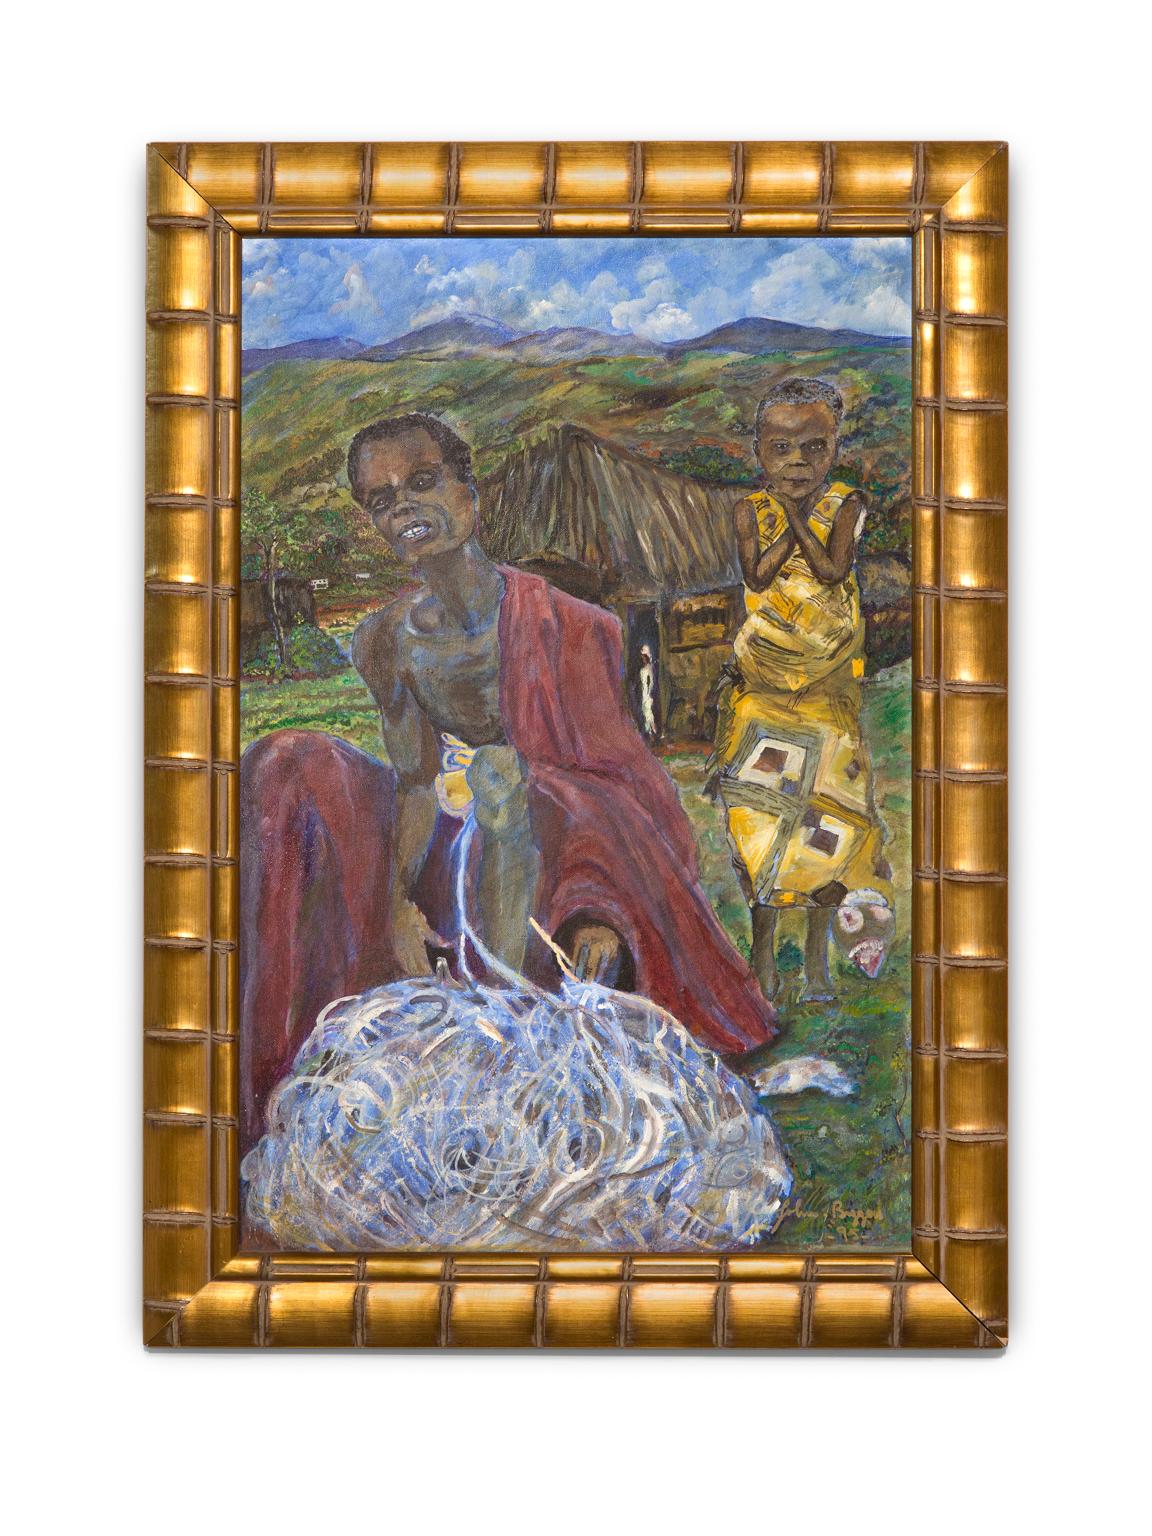 "Slice of Cotton Harvest" Figurative, Outdoors, Labor, Colors, Oil on Canvas